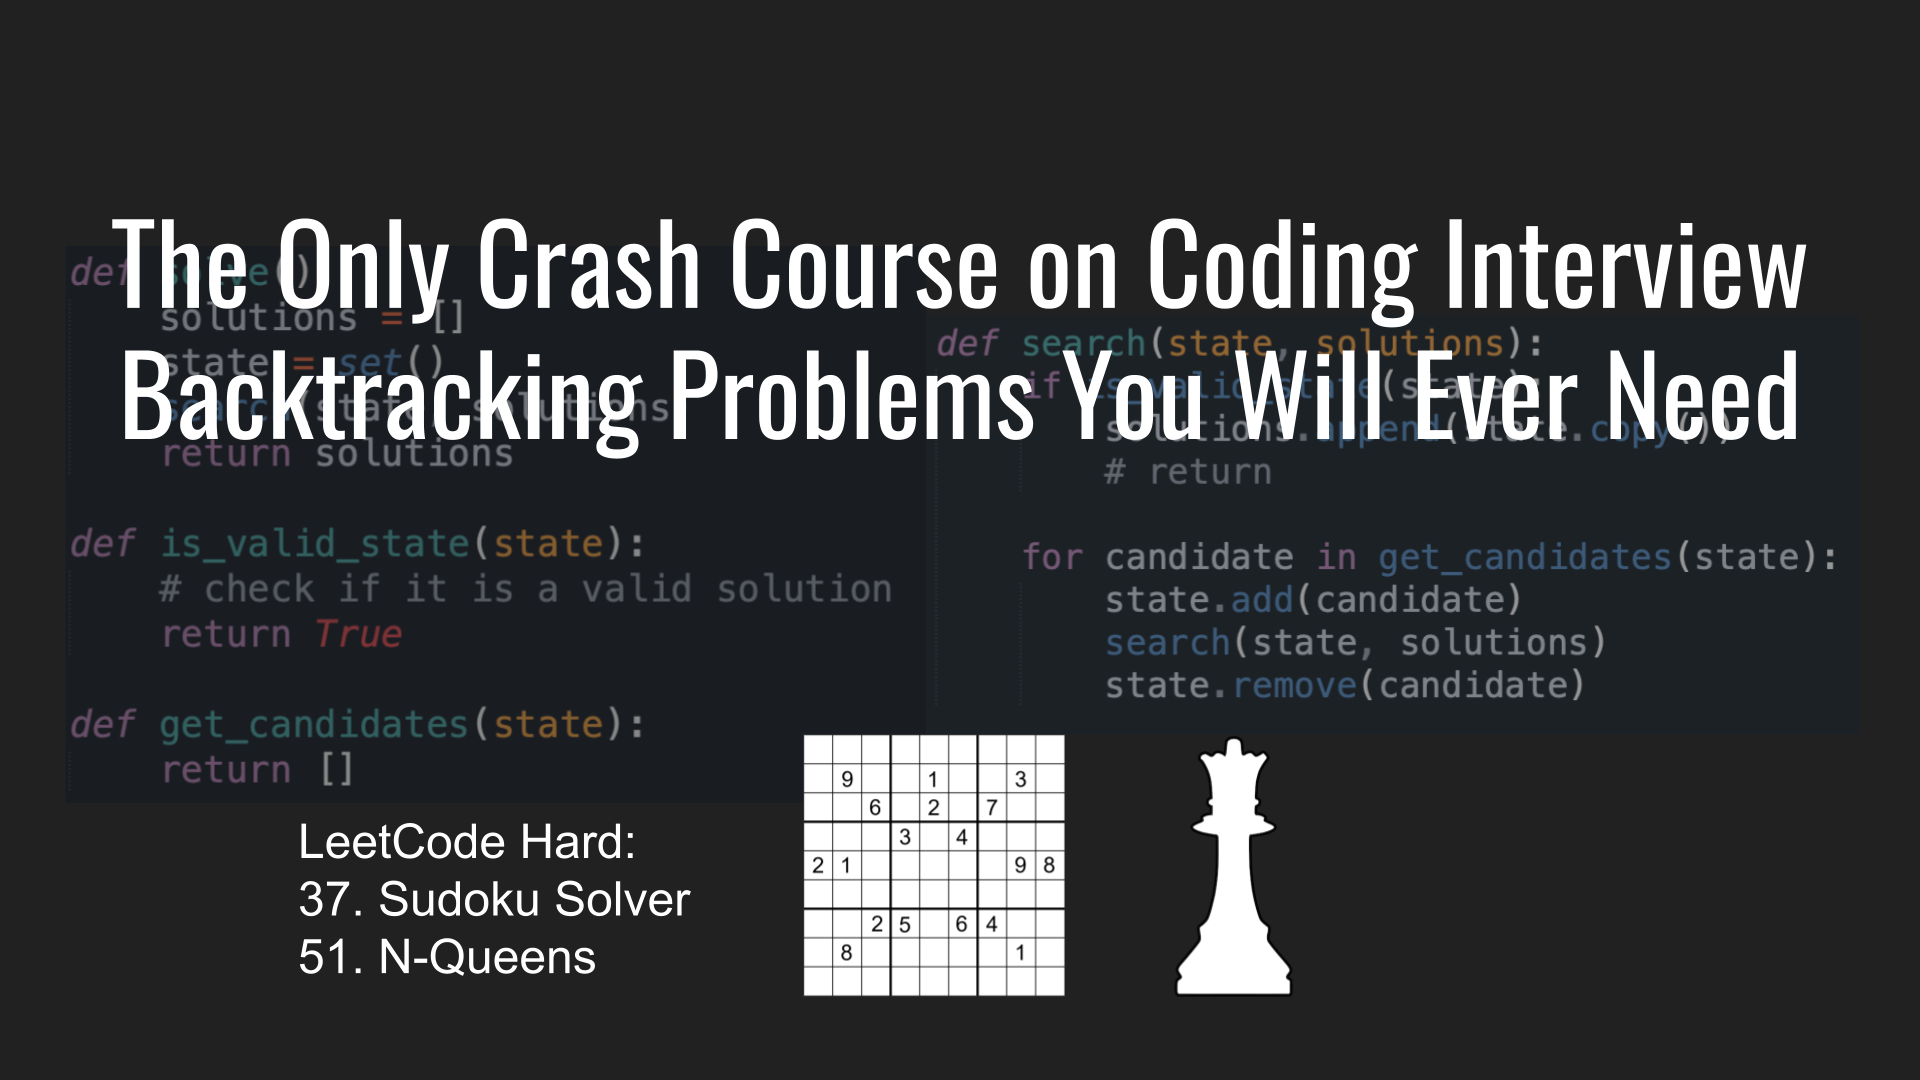 Coding Interview Backtracking Problems Crash Course – The Only One You'll Ever Need